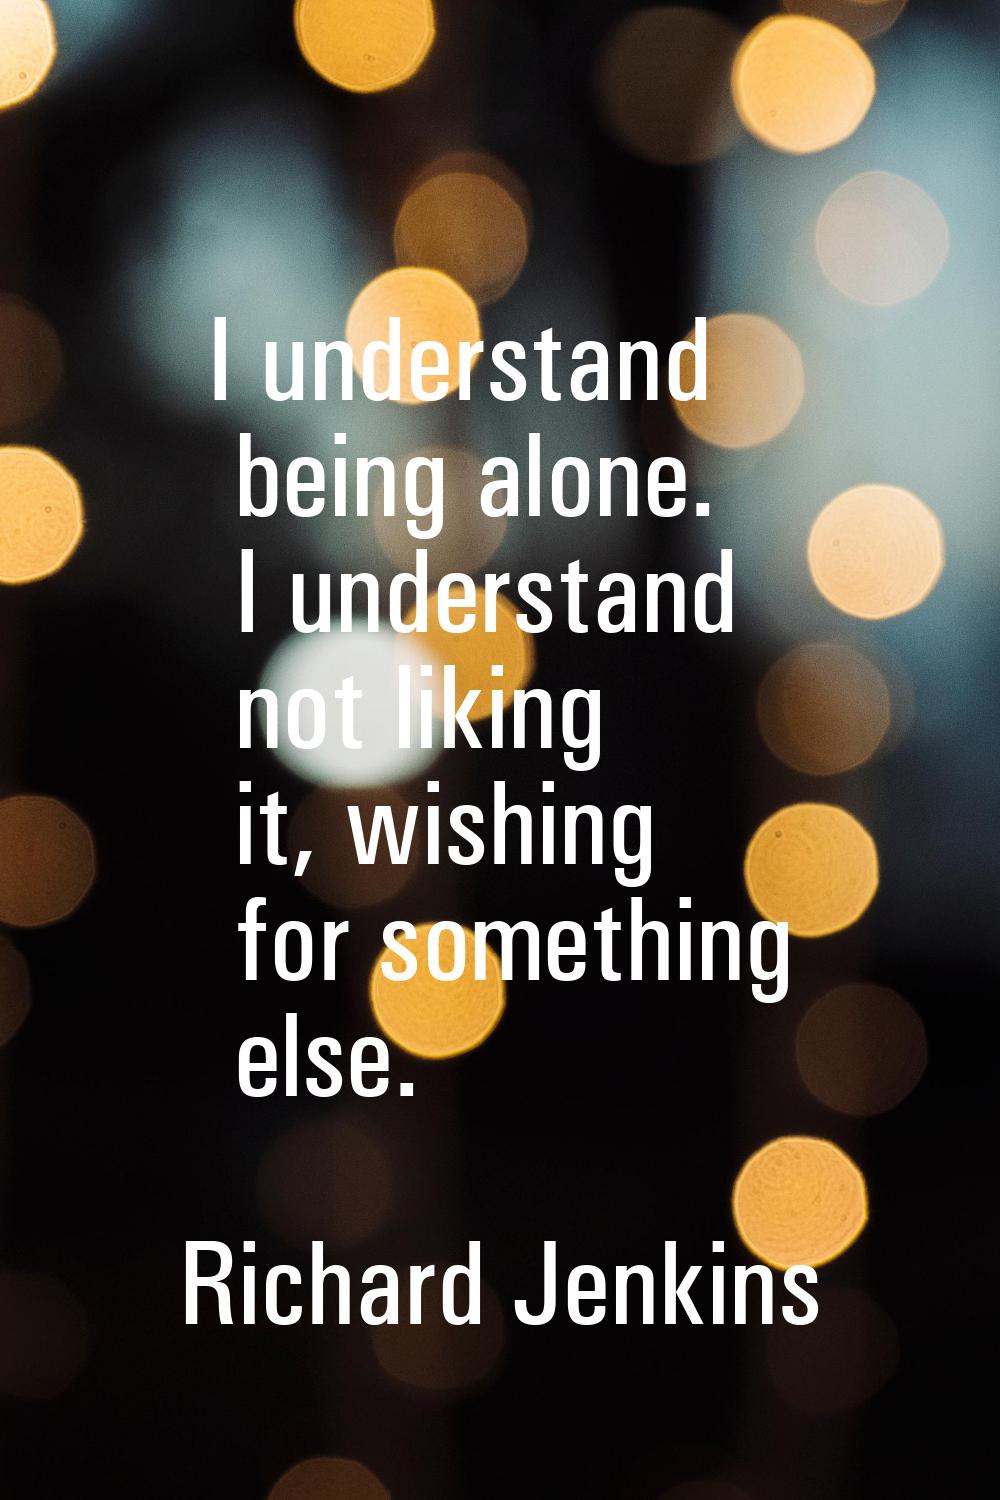 I understand being alone. I understand not liking it, wishing for something else.